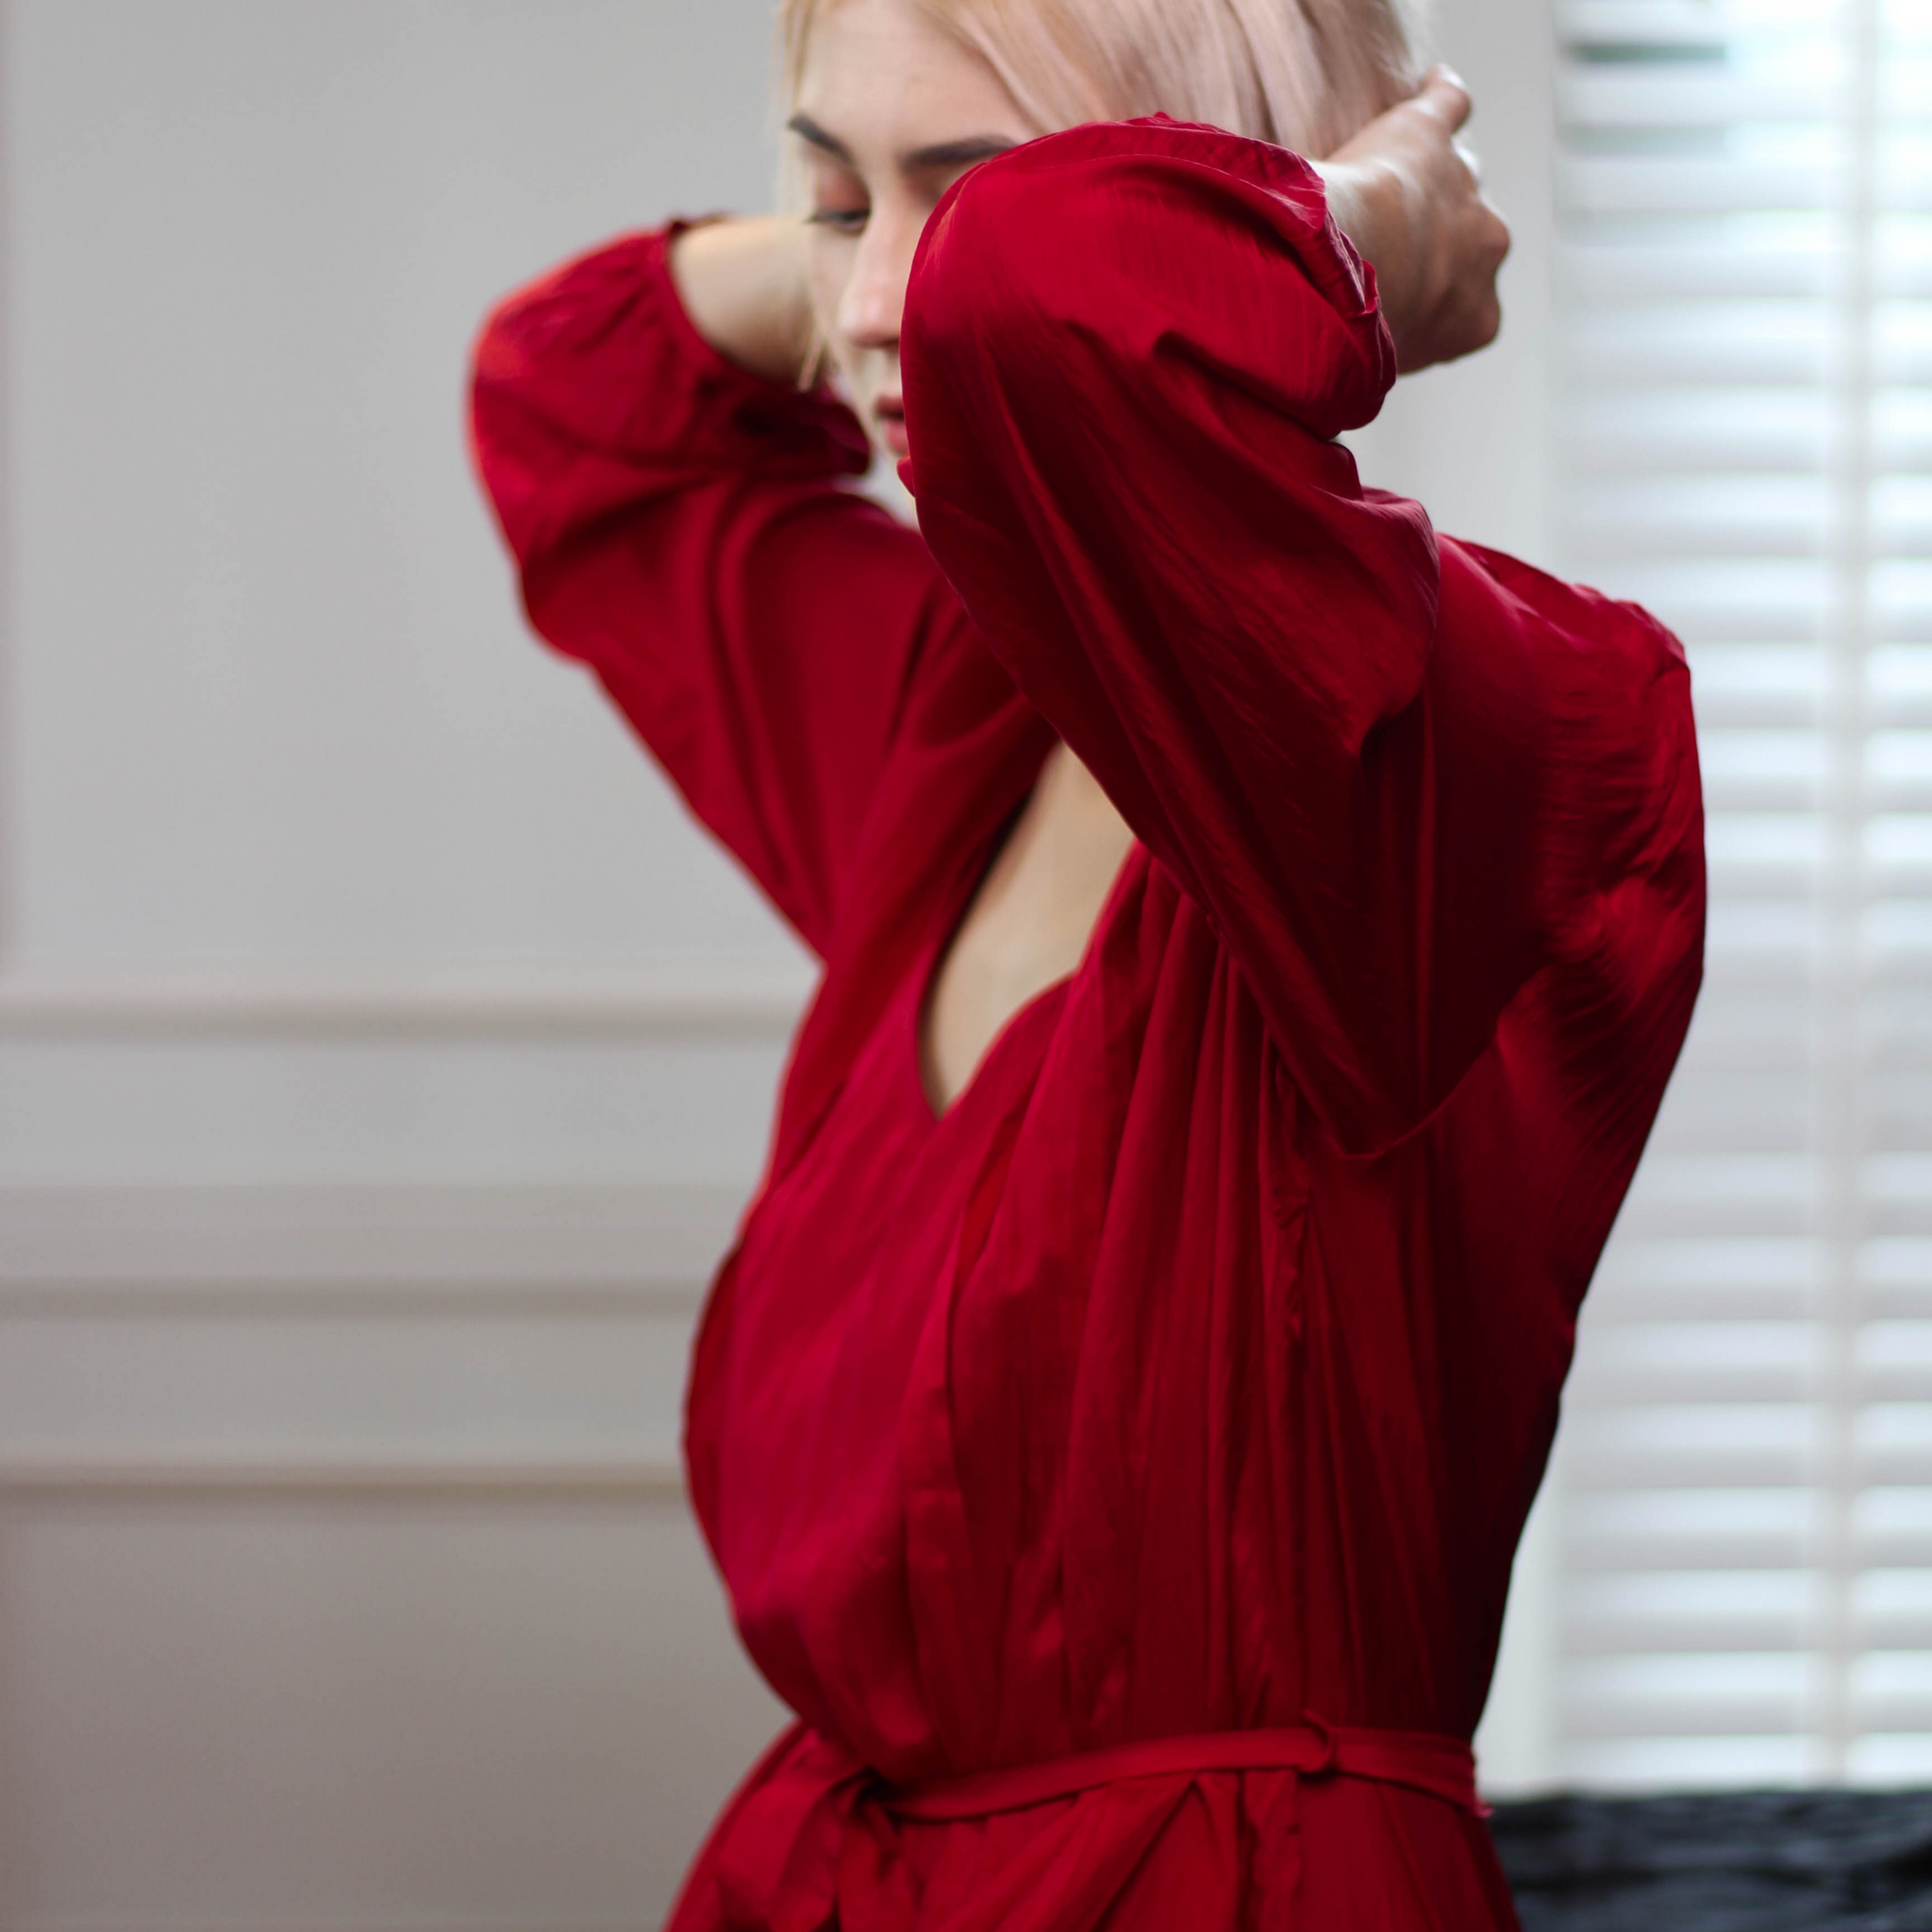 Washable Silk Robe-Maxi Length- Comfortable Loungewear - Red Hot